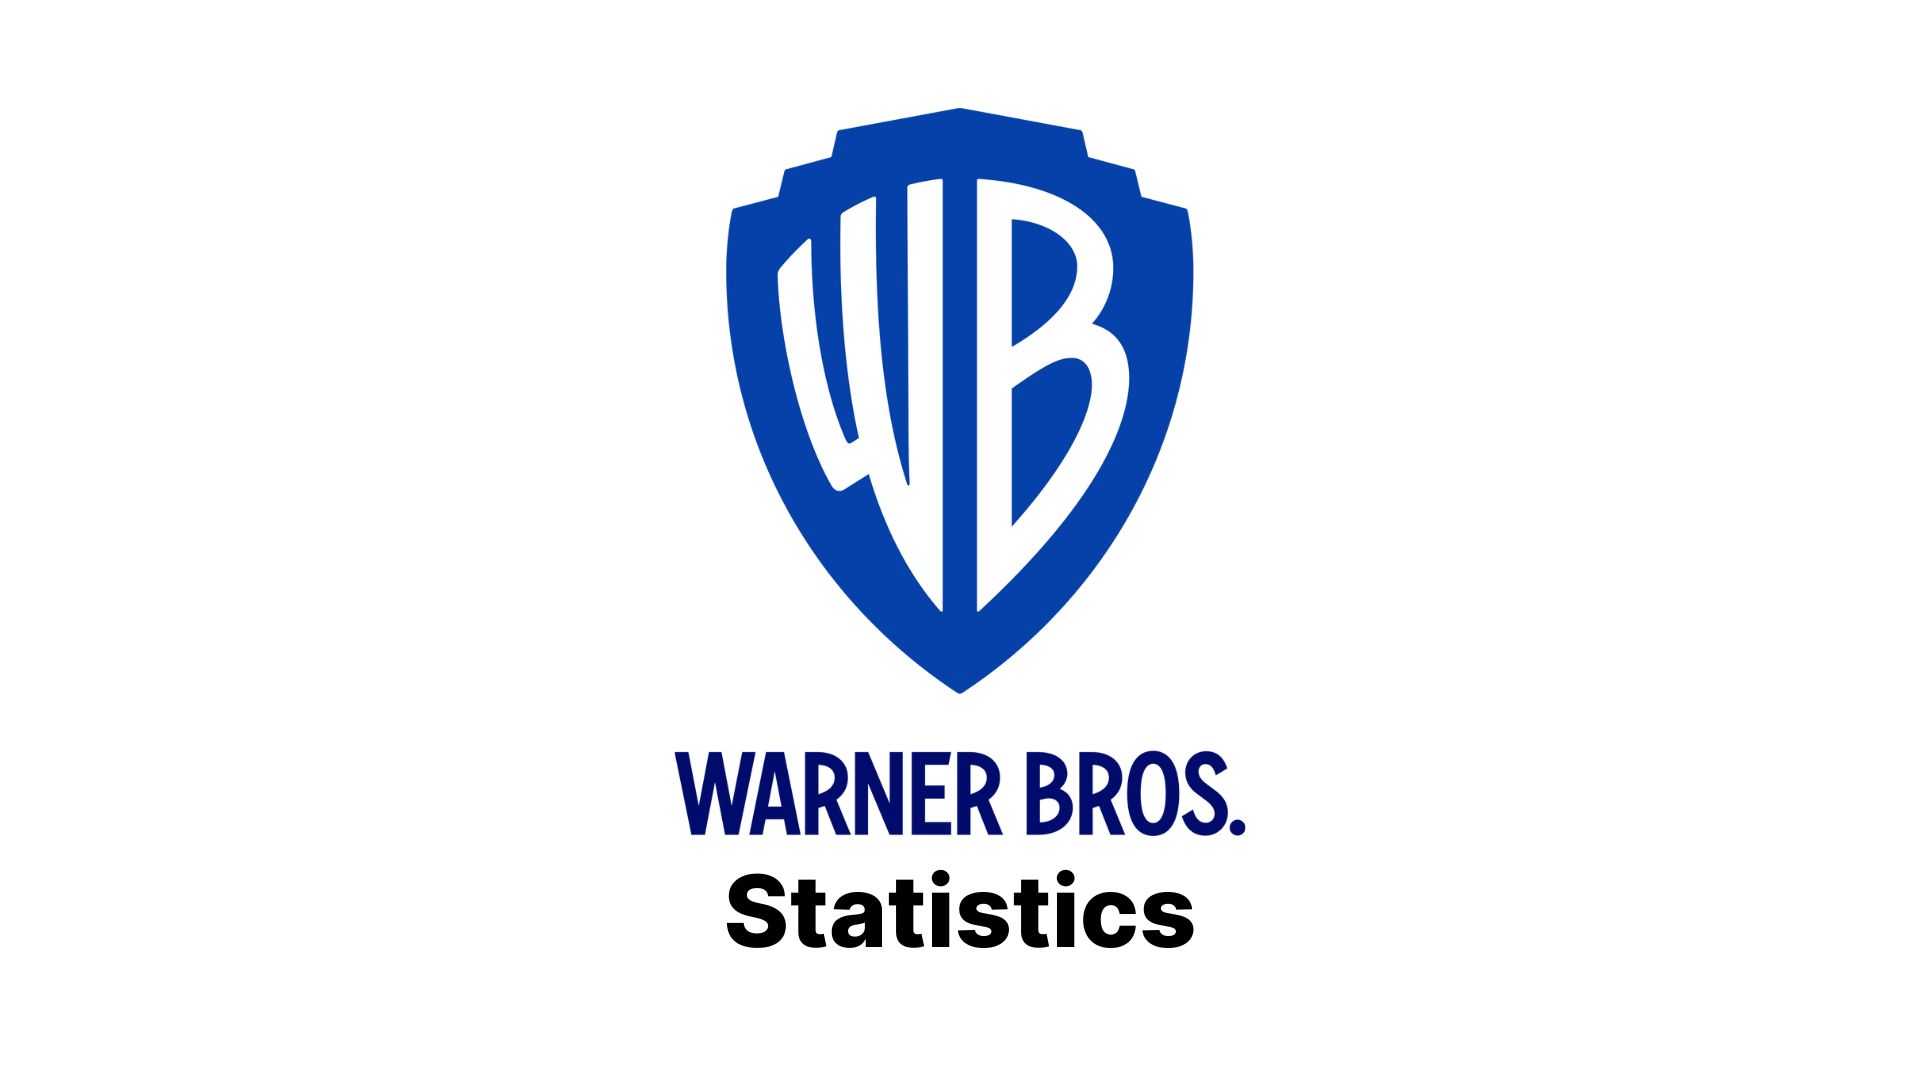 Warner Bros Statistics – By Users, Revenue and Number of Awards